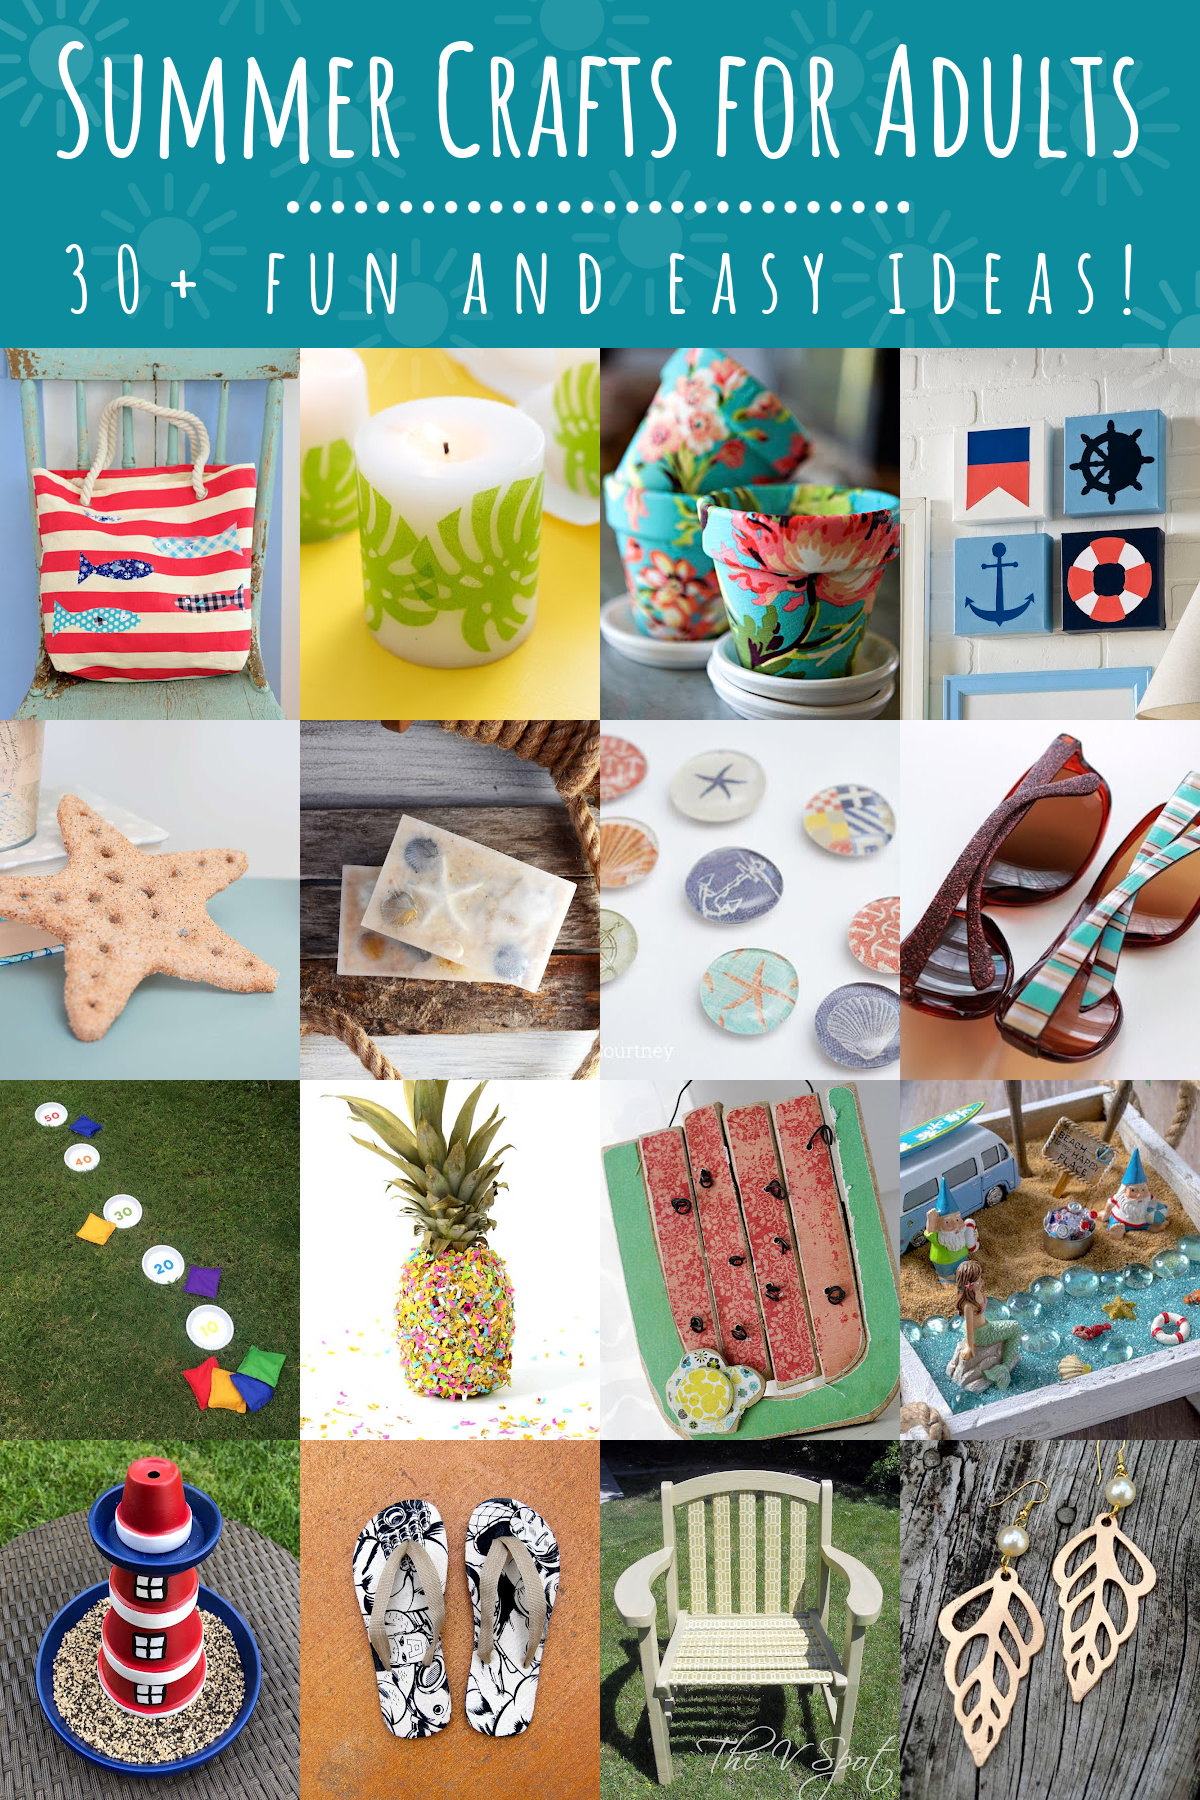 Summer crafts for adults